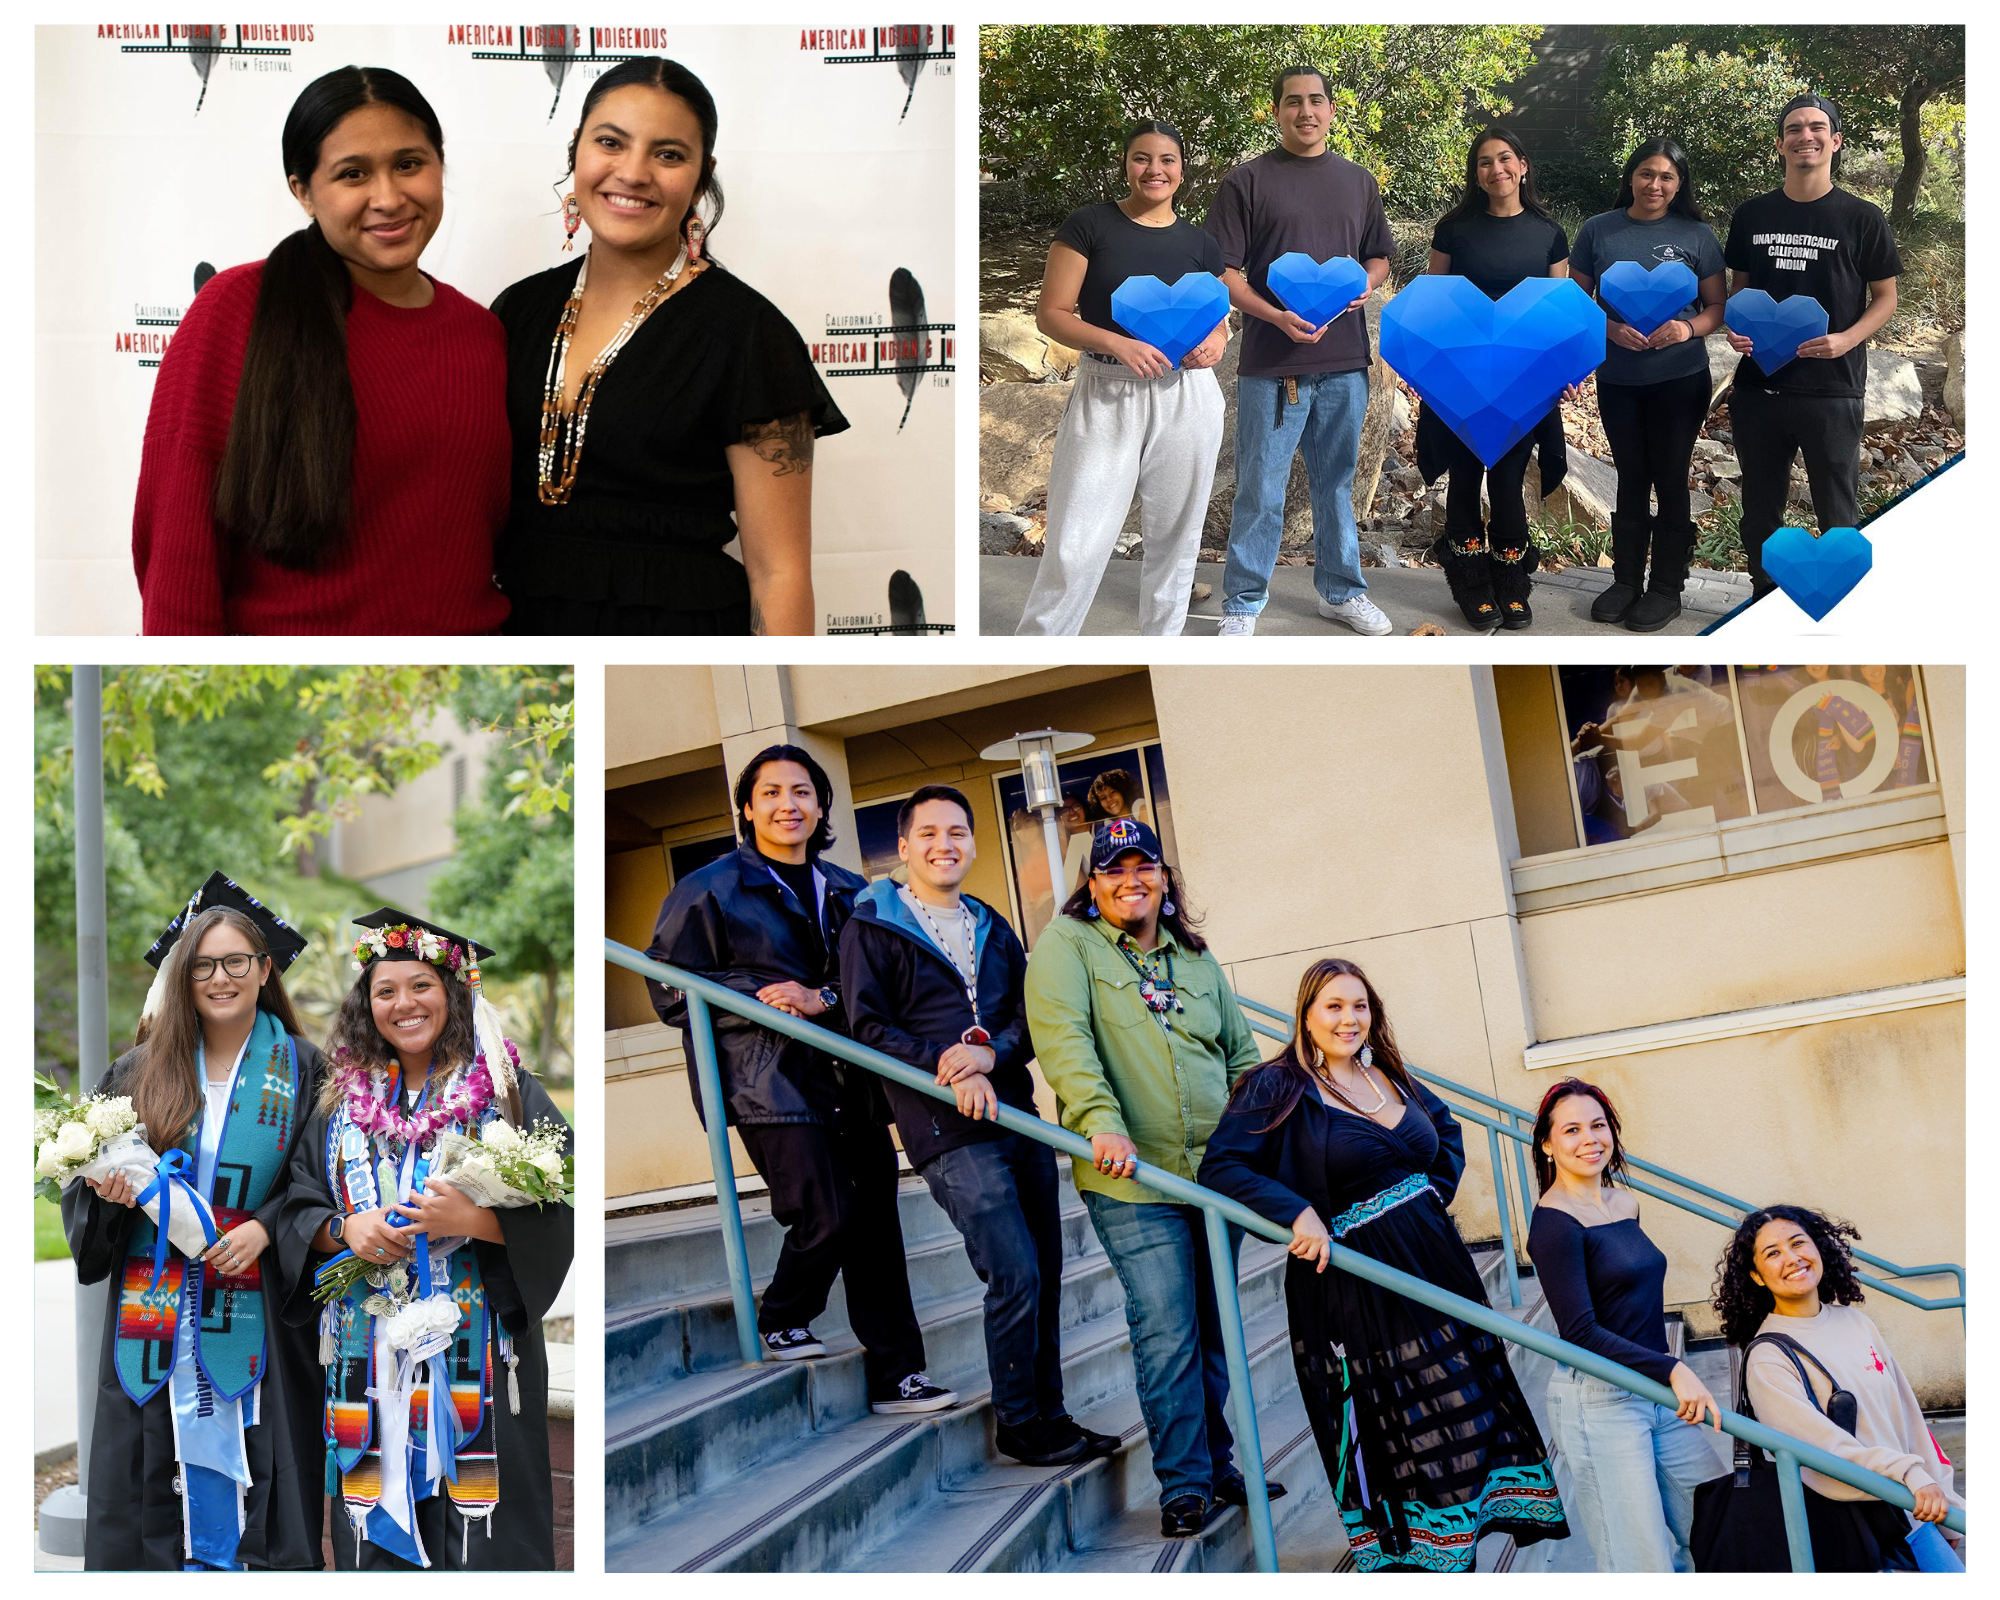 Photo collage of four images showcasing AI/AN students at the American Indian Graduate Honoring Ceremony, posed on outdoor stairs in a professional portrait, holding blue hearts for a giving day image, standing in front of a California's American Indian & Indigenous Film Festival backdrop